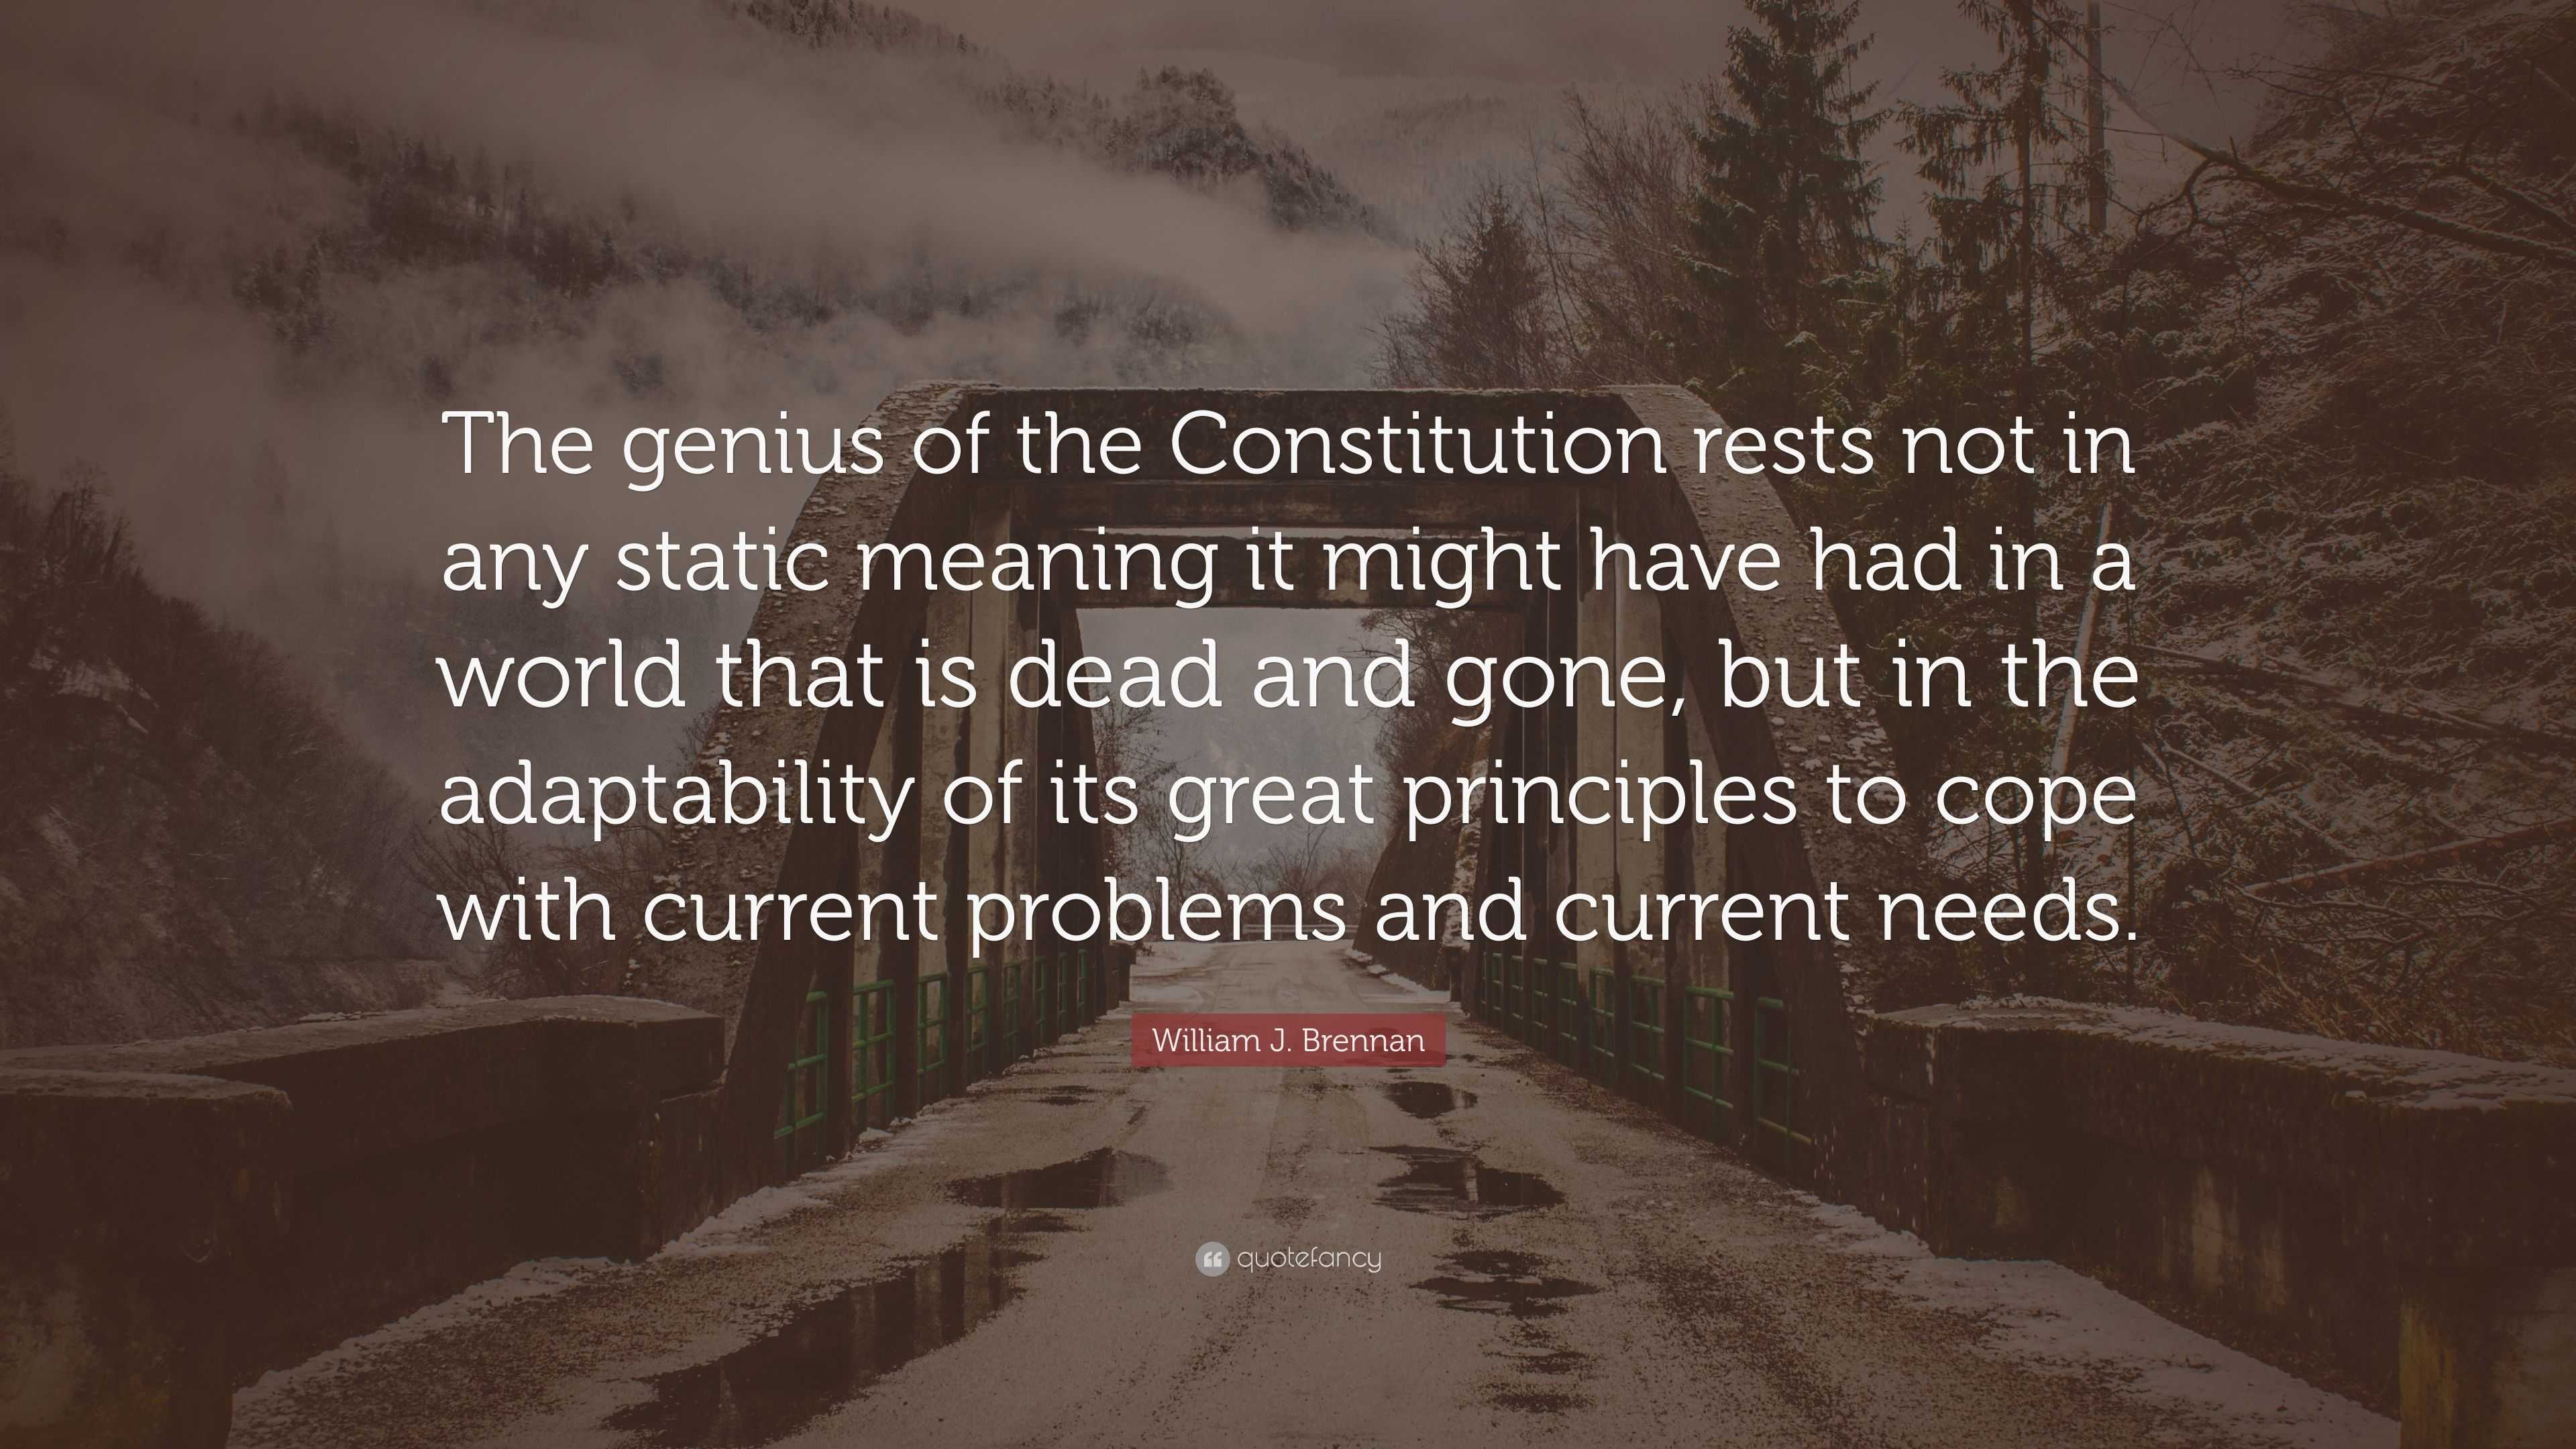 William J Brennan Quote “the Genius Of The Constitution Rests Not In Any Static Meaning It 2945